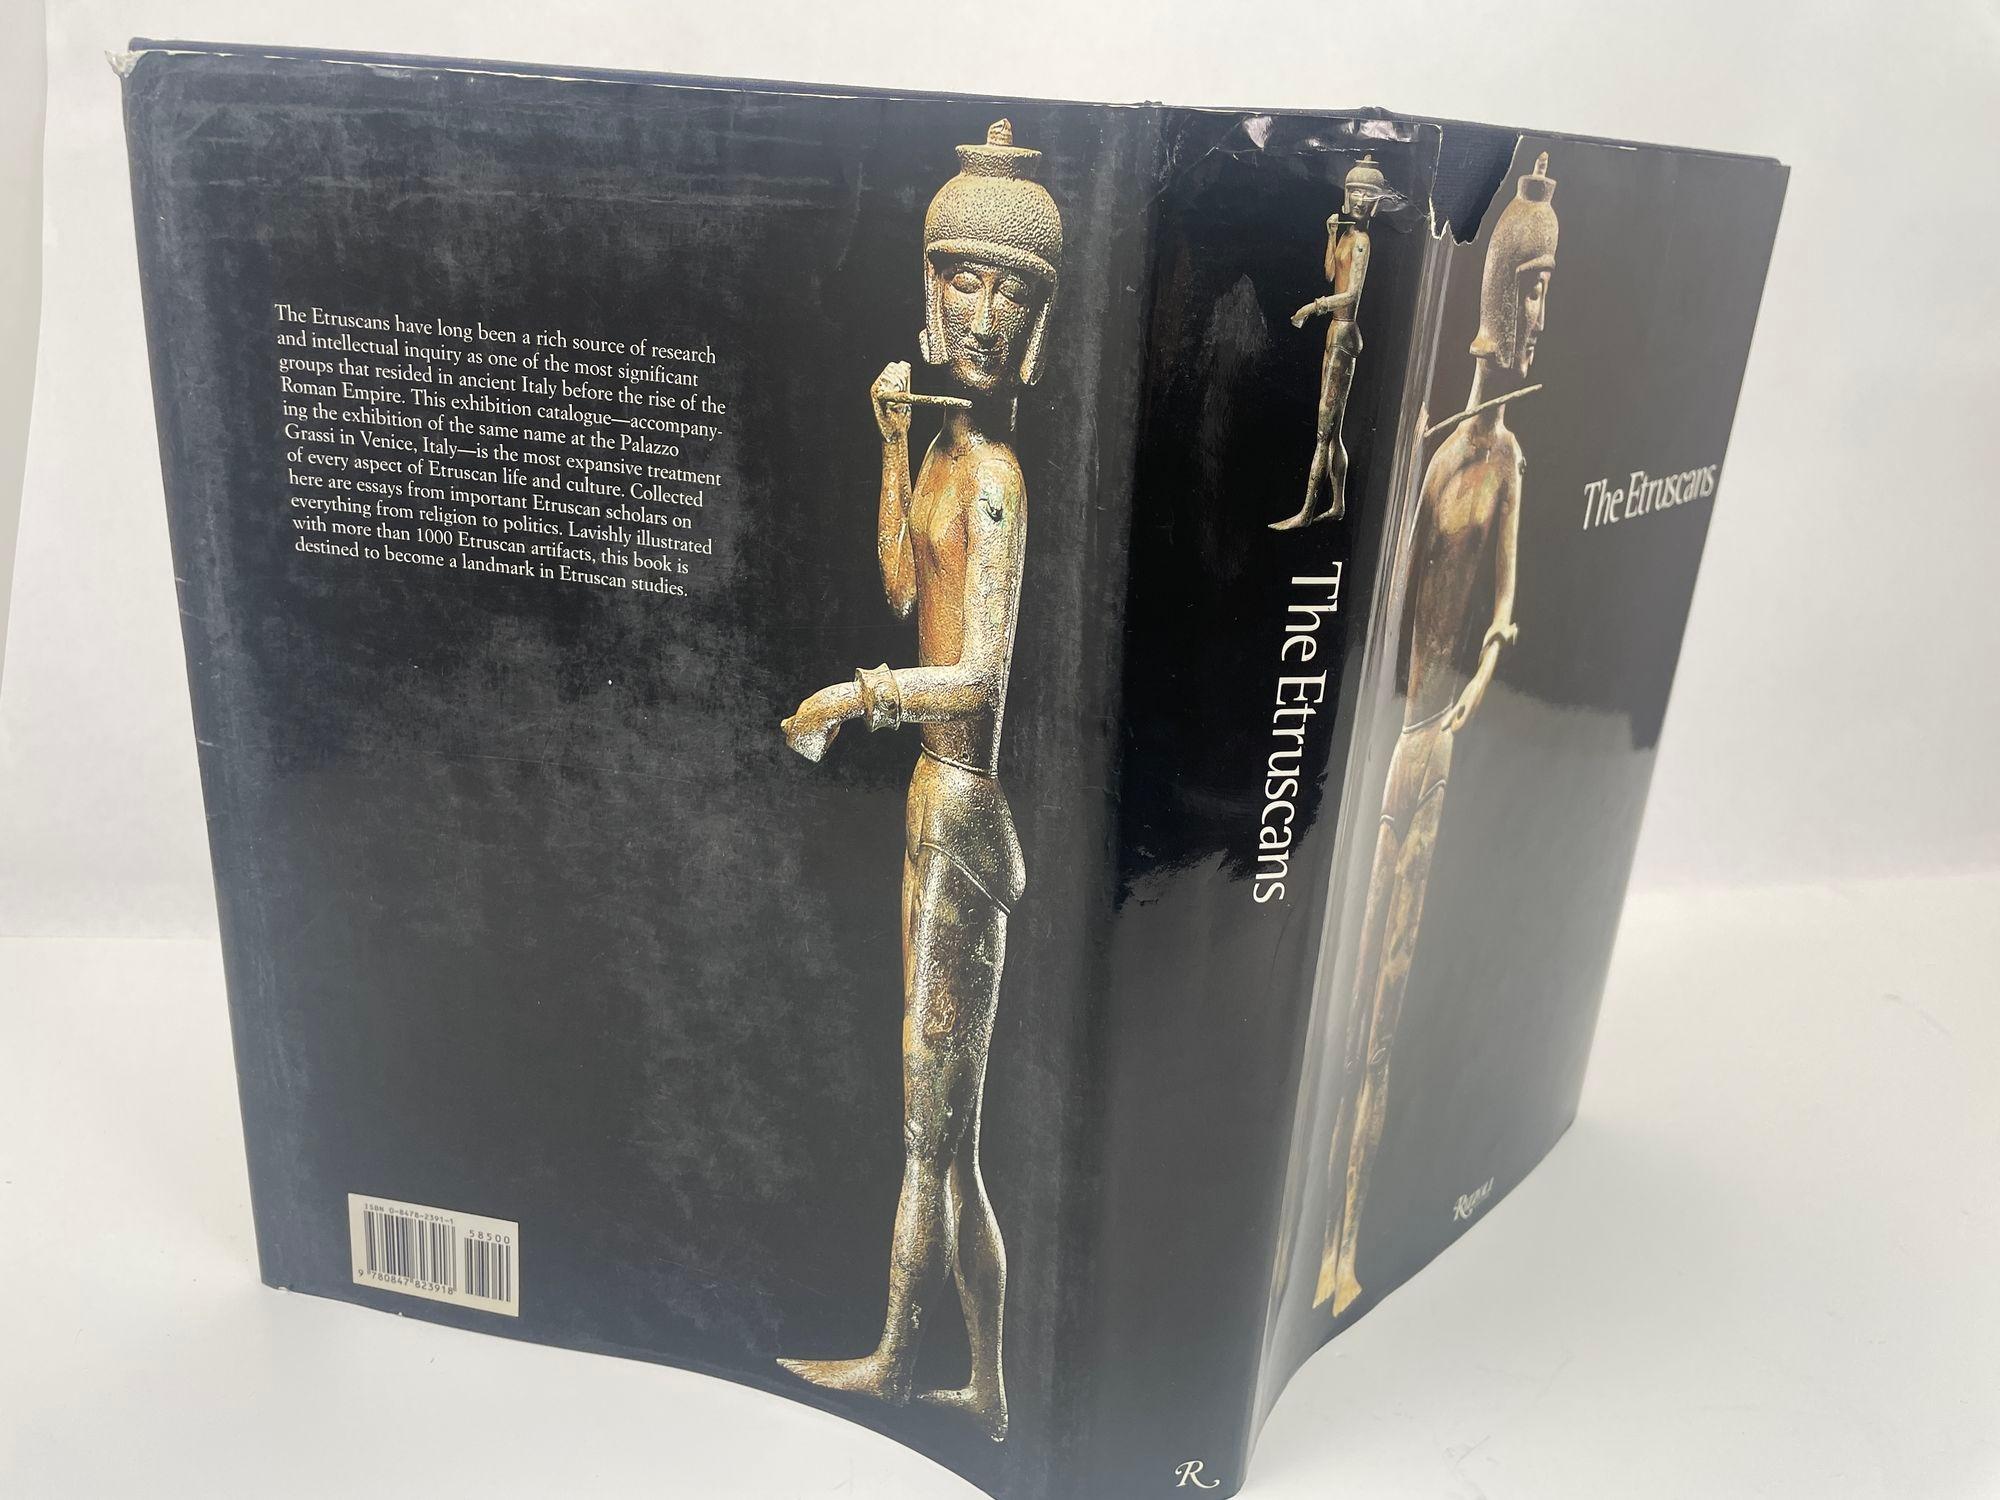 The Etruscans Hardcover Book by Mario Torelli 1st Ed. 2001 Rizzoli In Good Condition For Sale In North Hollywood, CA